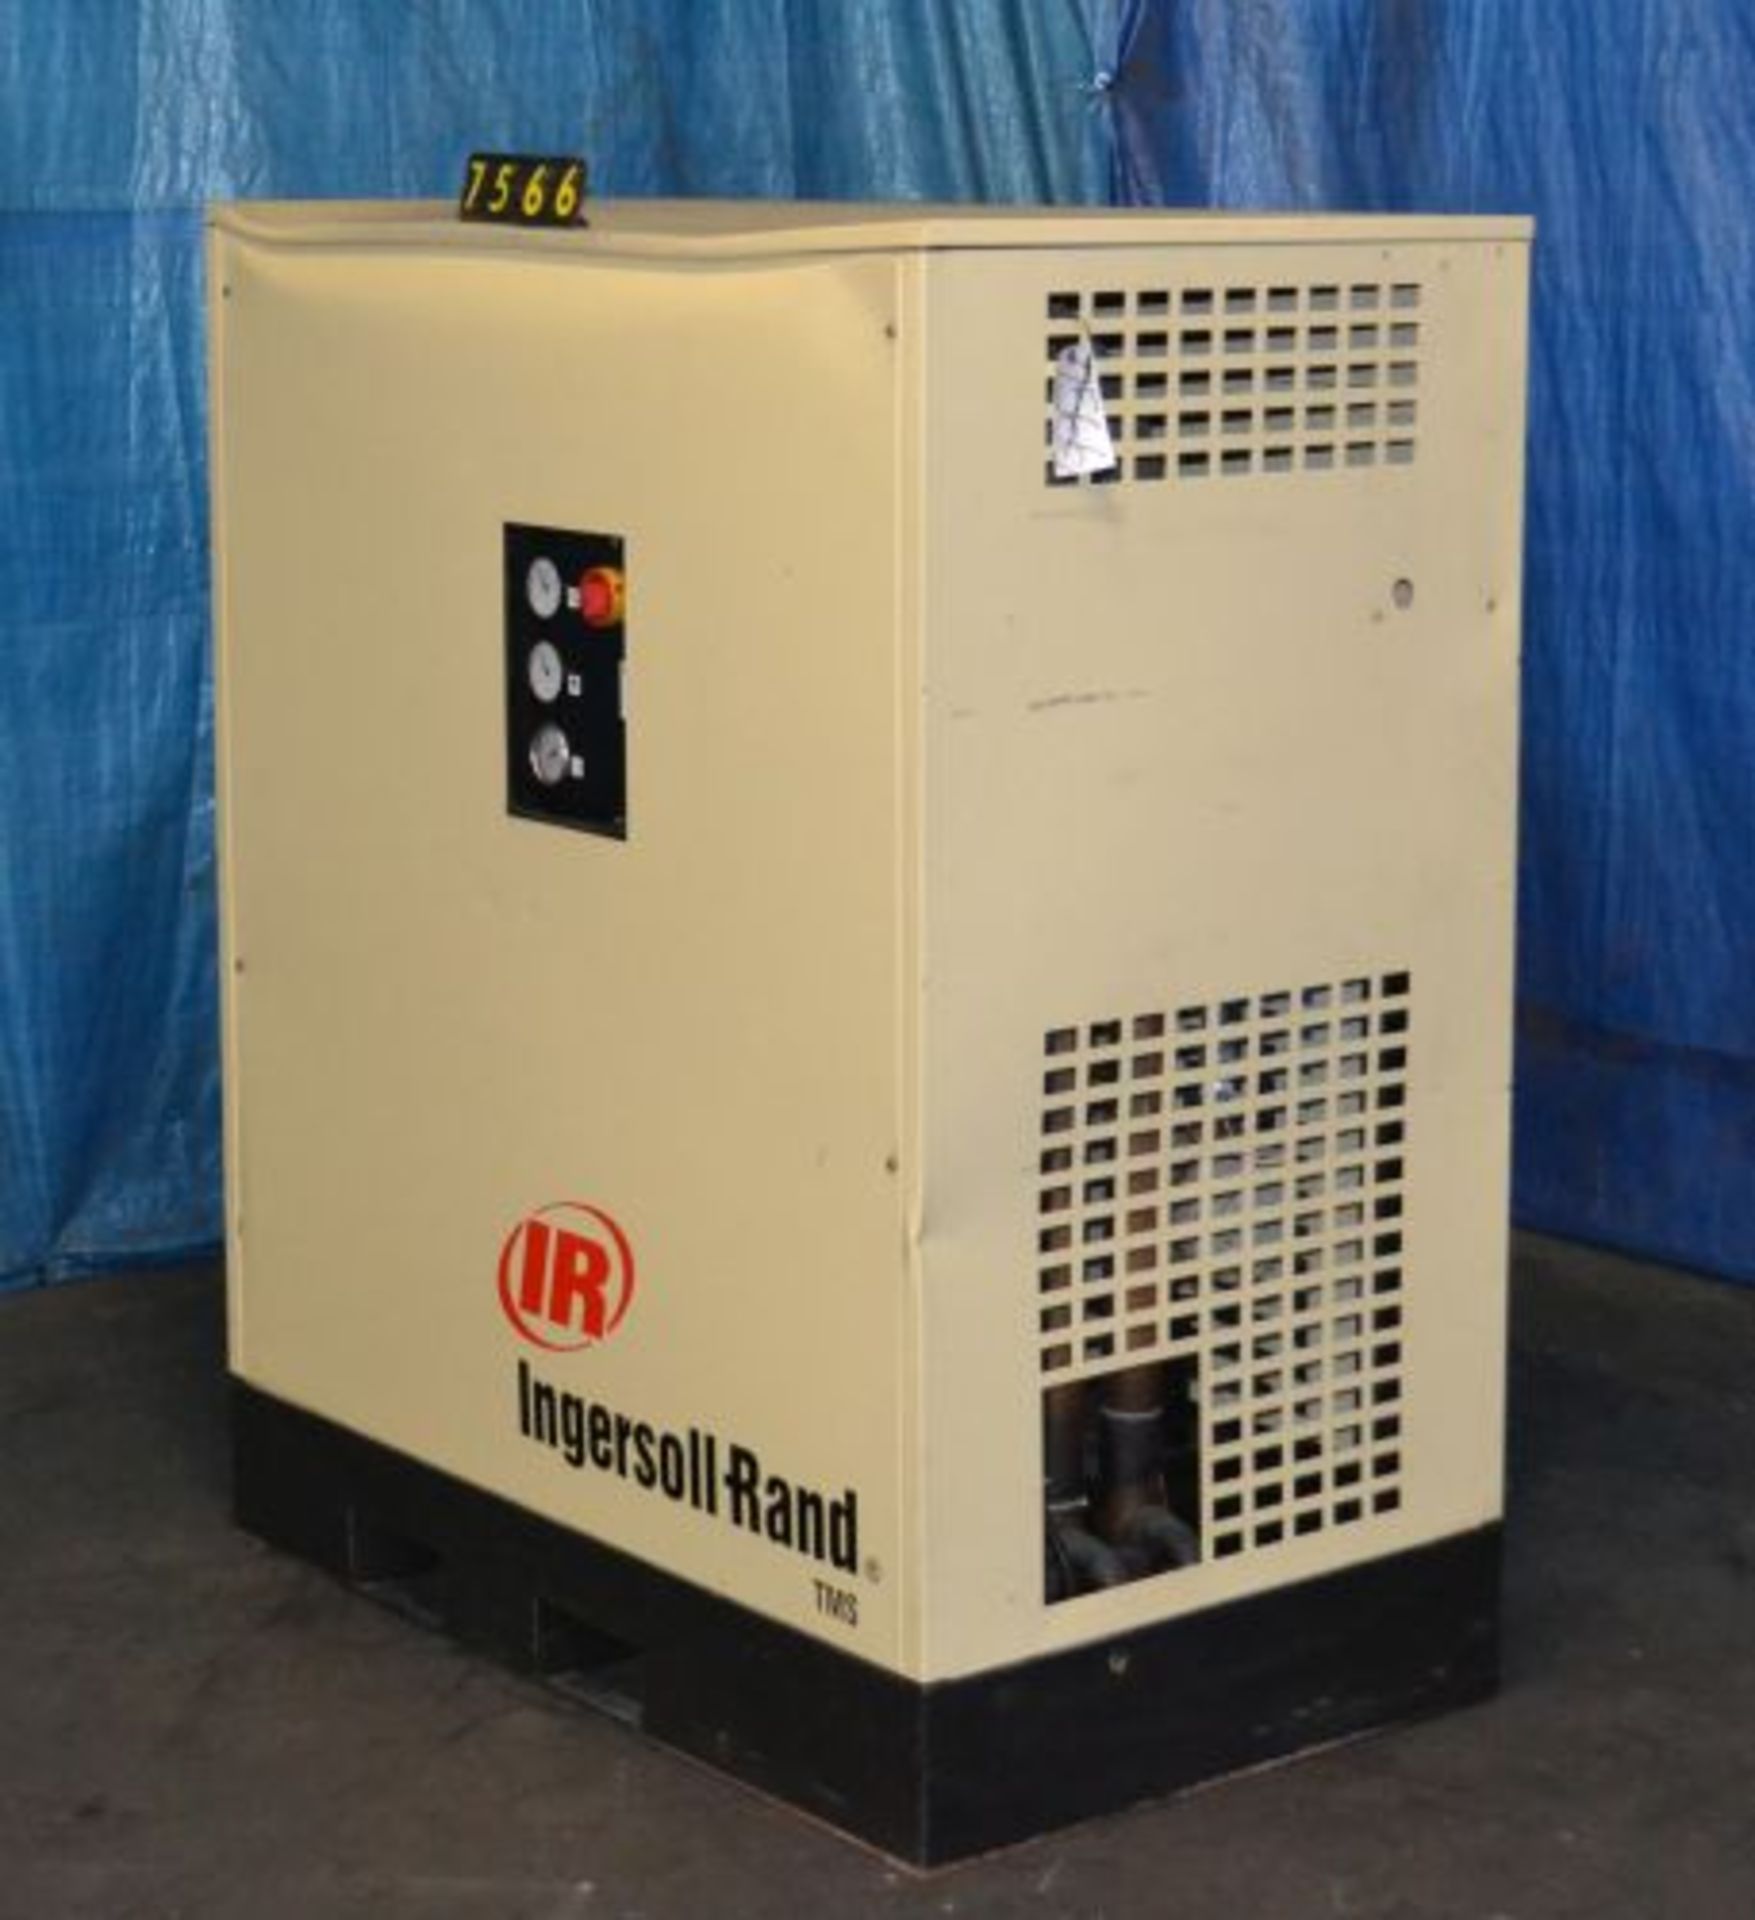 Ingersoll-Rand model number TMS0380 air dryer - Image 2 of 5